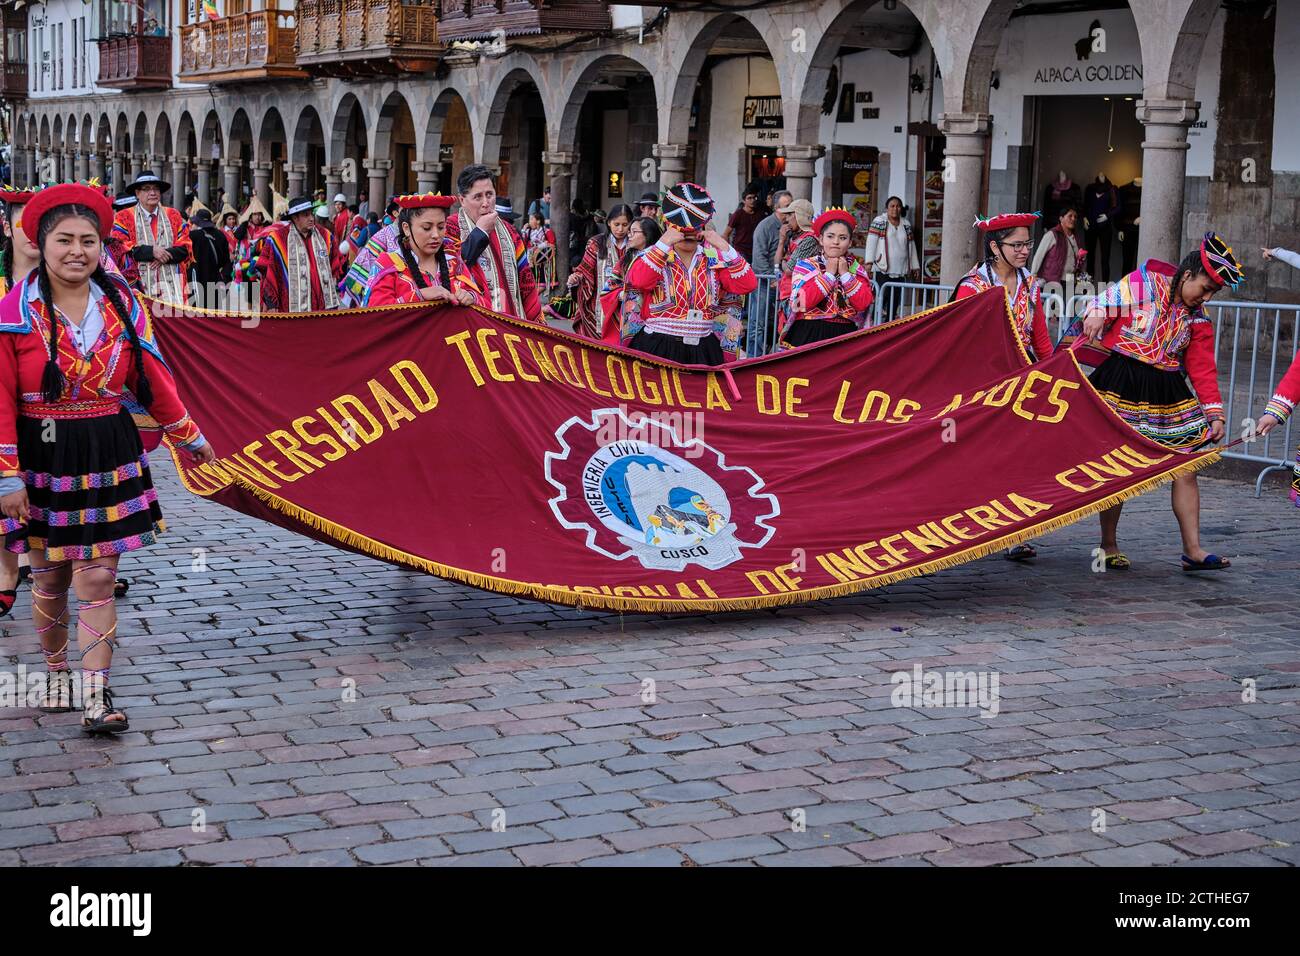 Civil engineering students from the Technical University of the Andes march in colourful costume with a banner during the Inti Raymi'rata sun festival Stock Photo